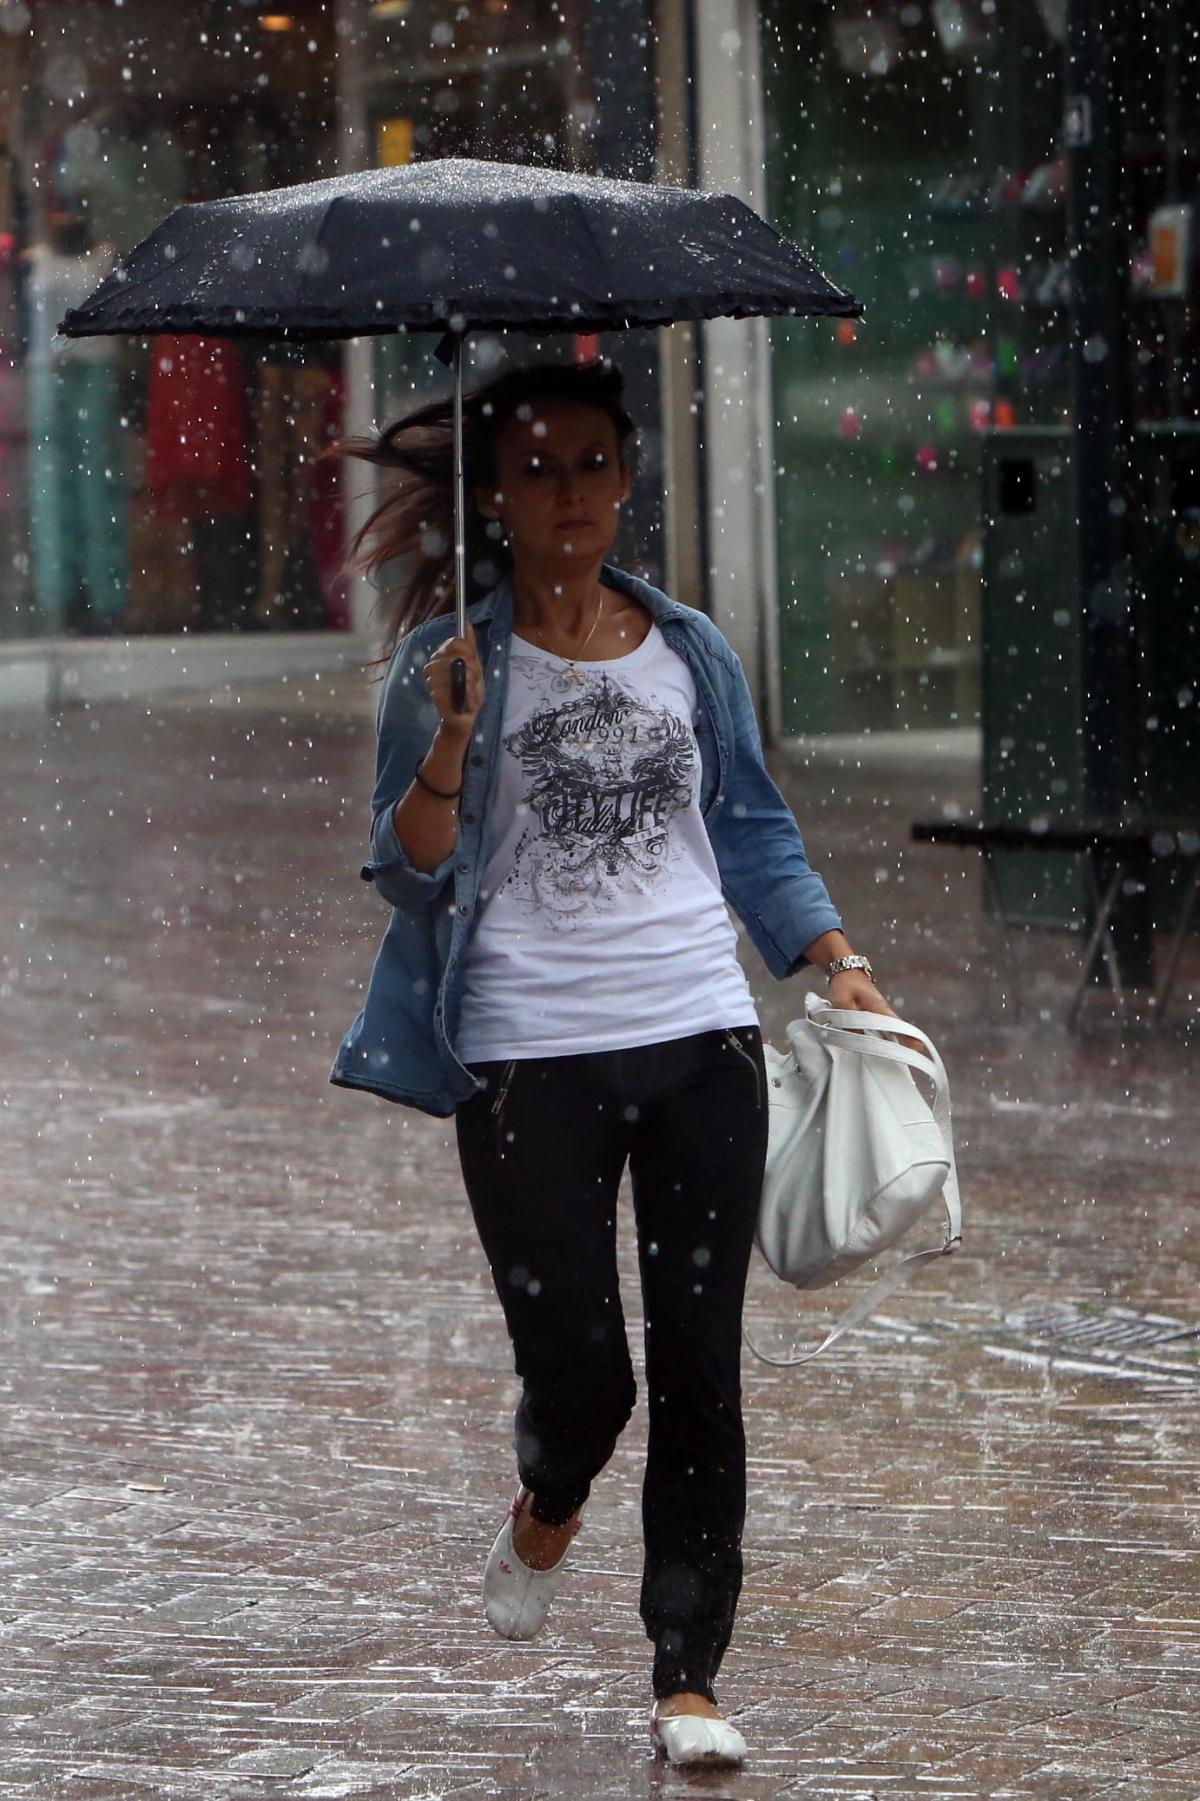 Pictures of flooding after heavy rain and thunderstorms hit Bournemouth and Poole